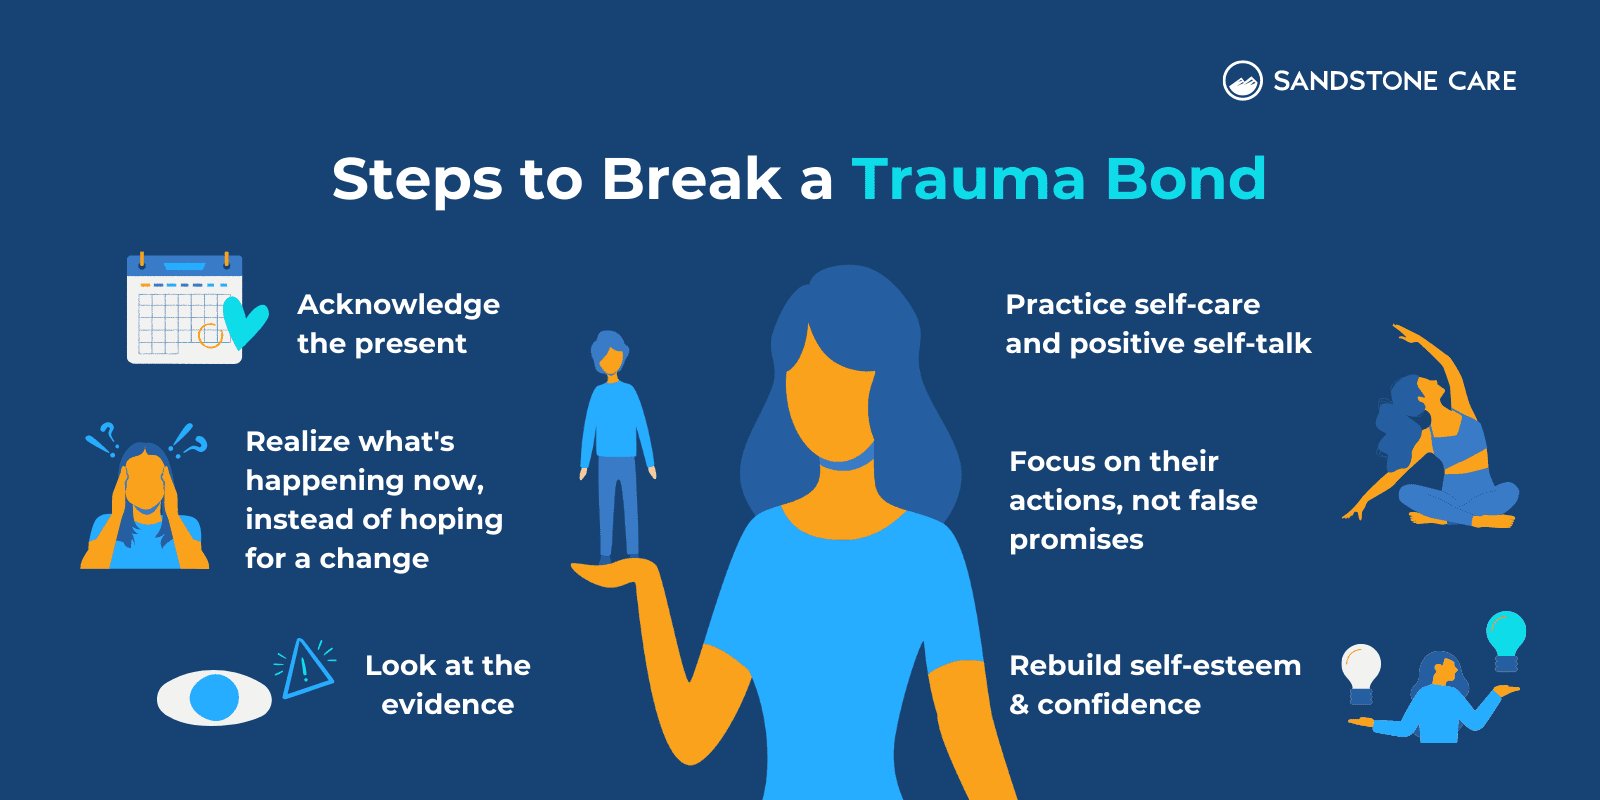 Steps To Break a Trauma Bond illustrated with relevant digital illustrations